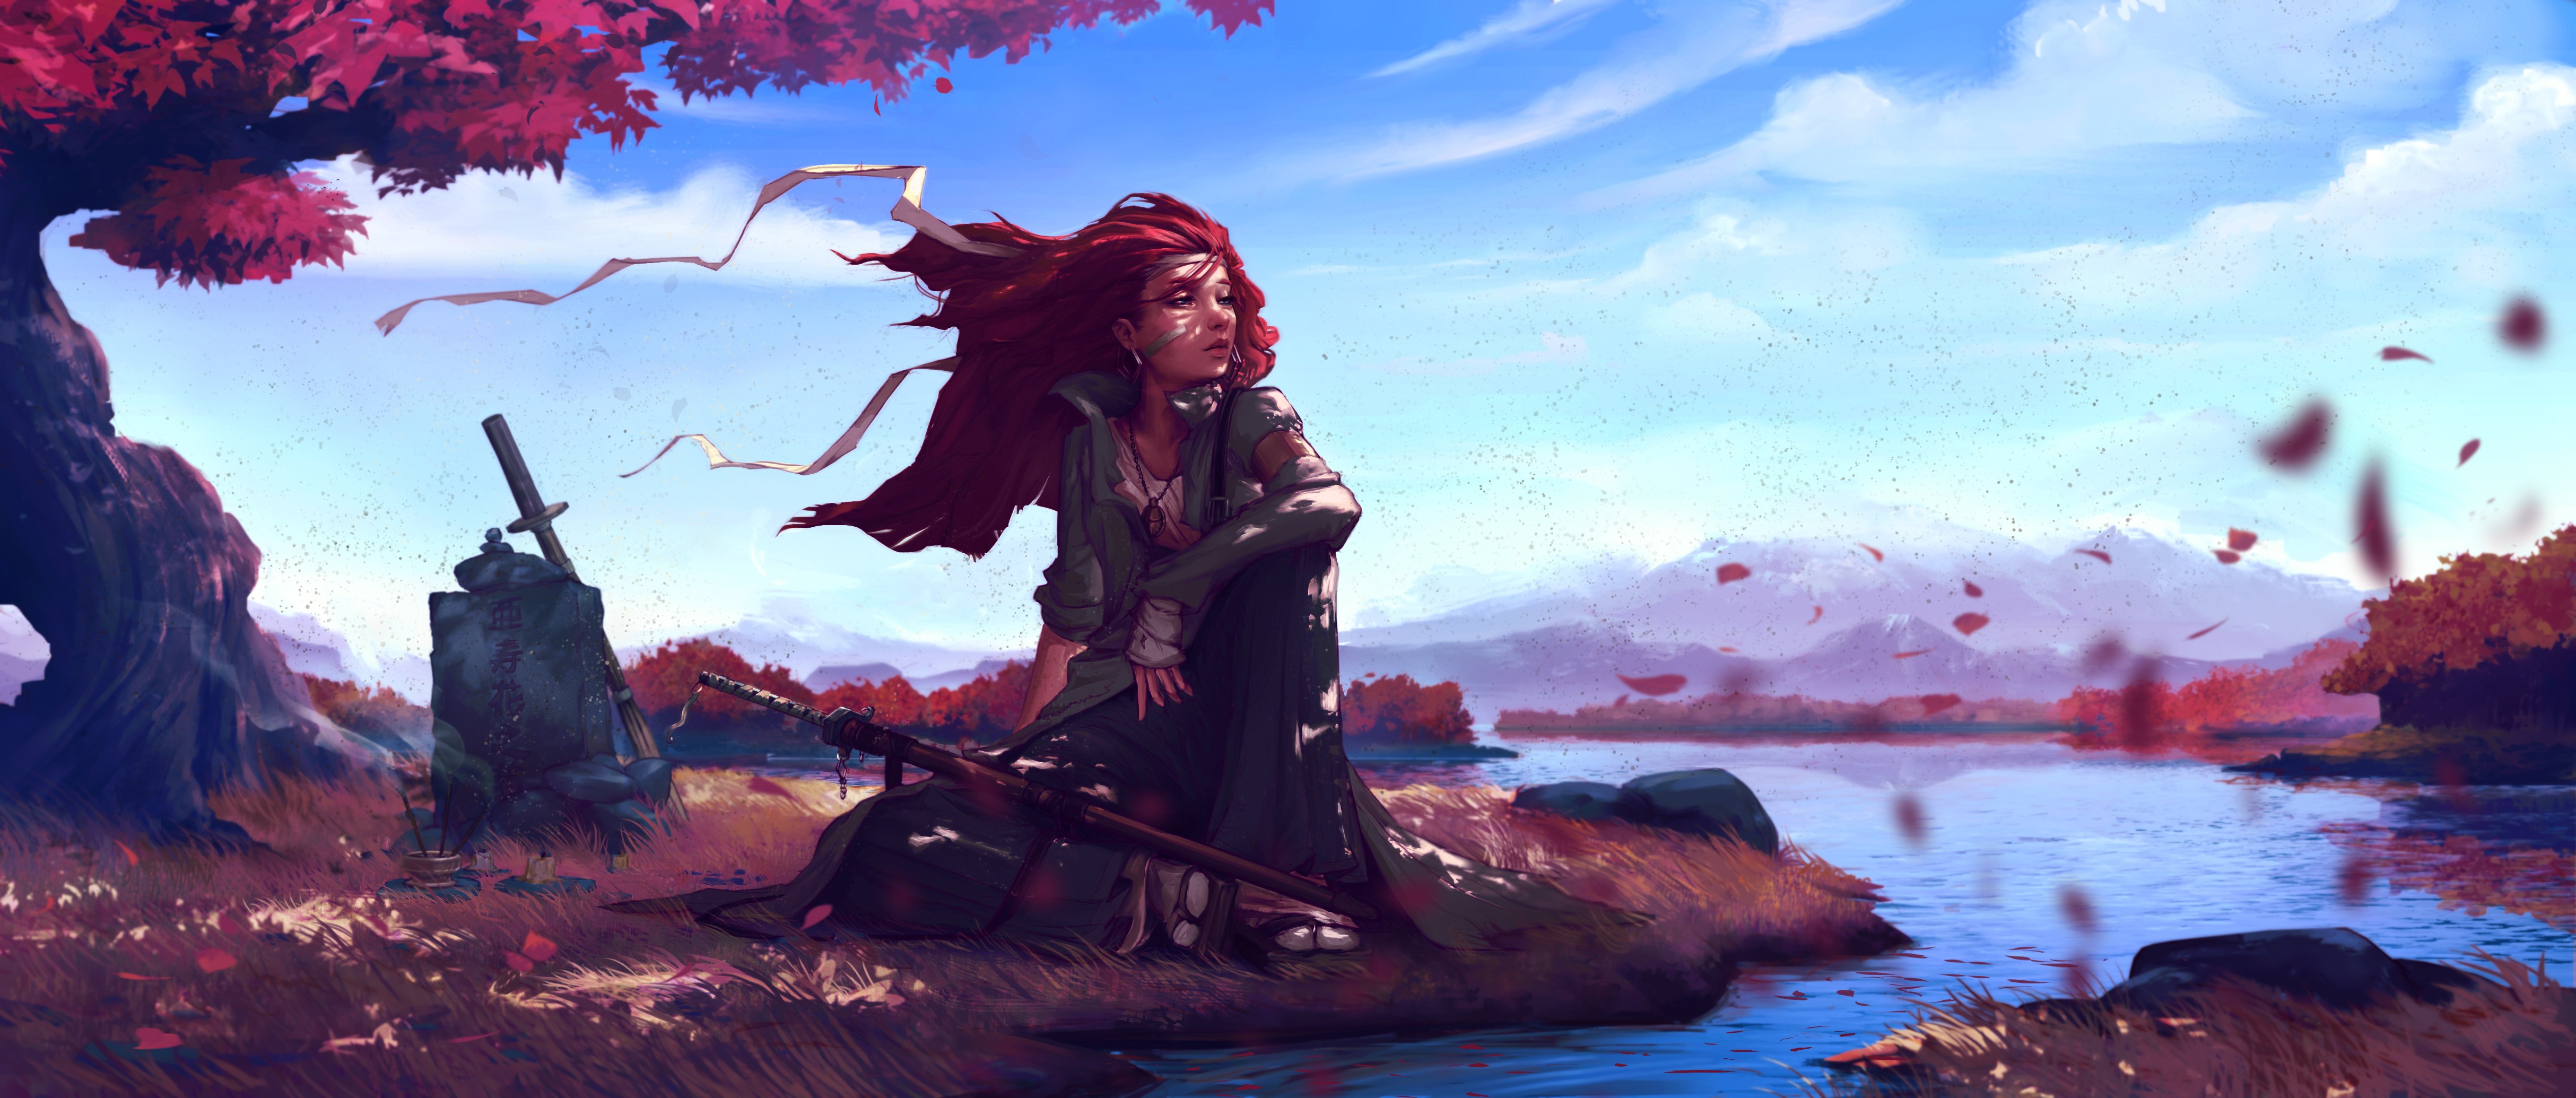 Anime 4856x2070 anime girls sky leaves sword weapon river water landscape redhead